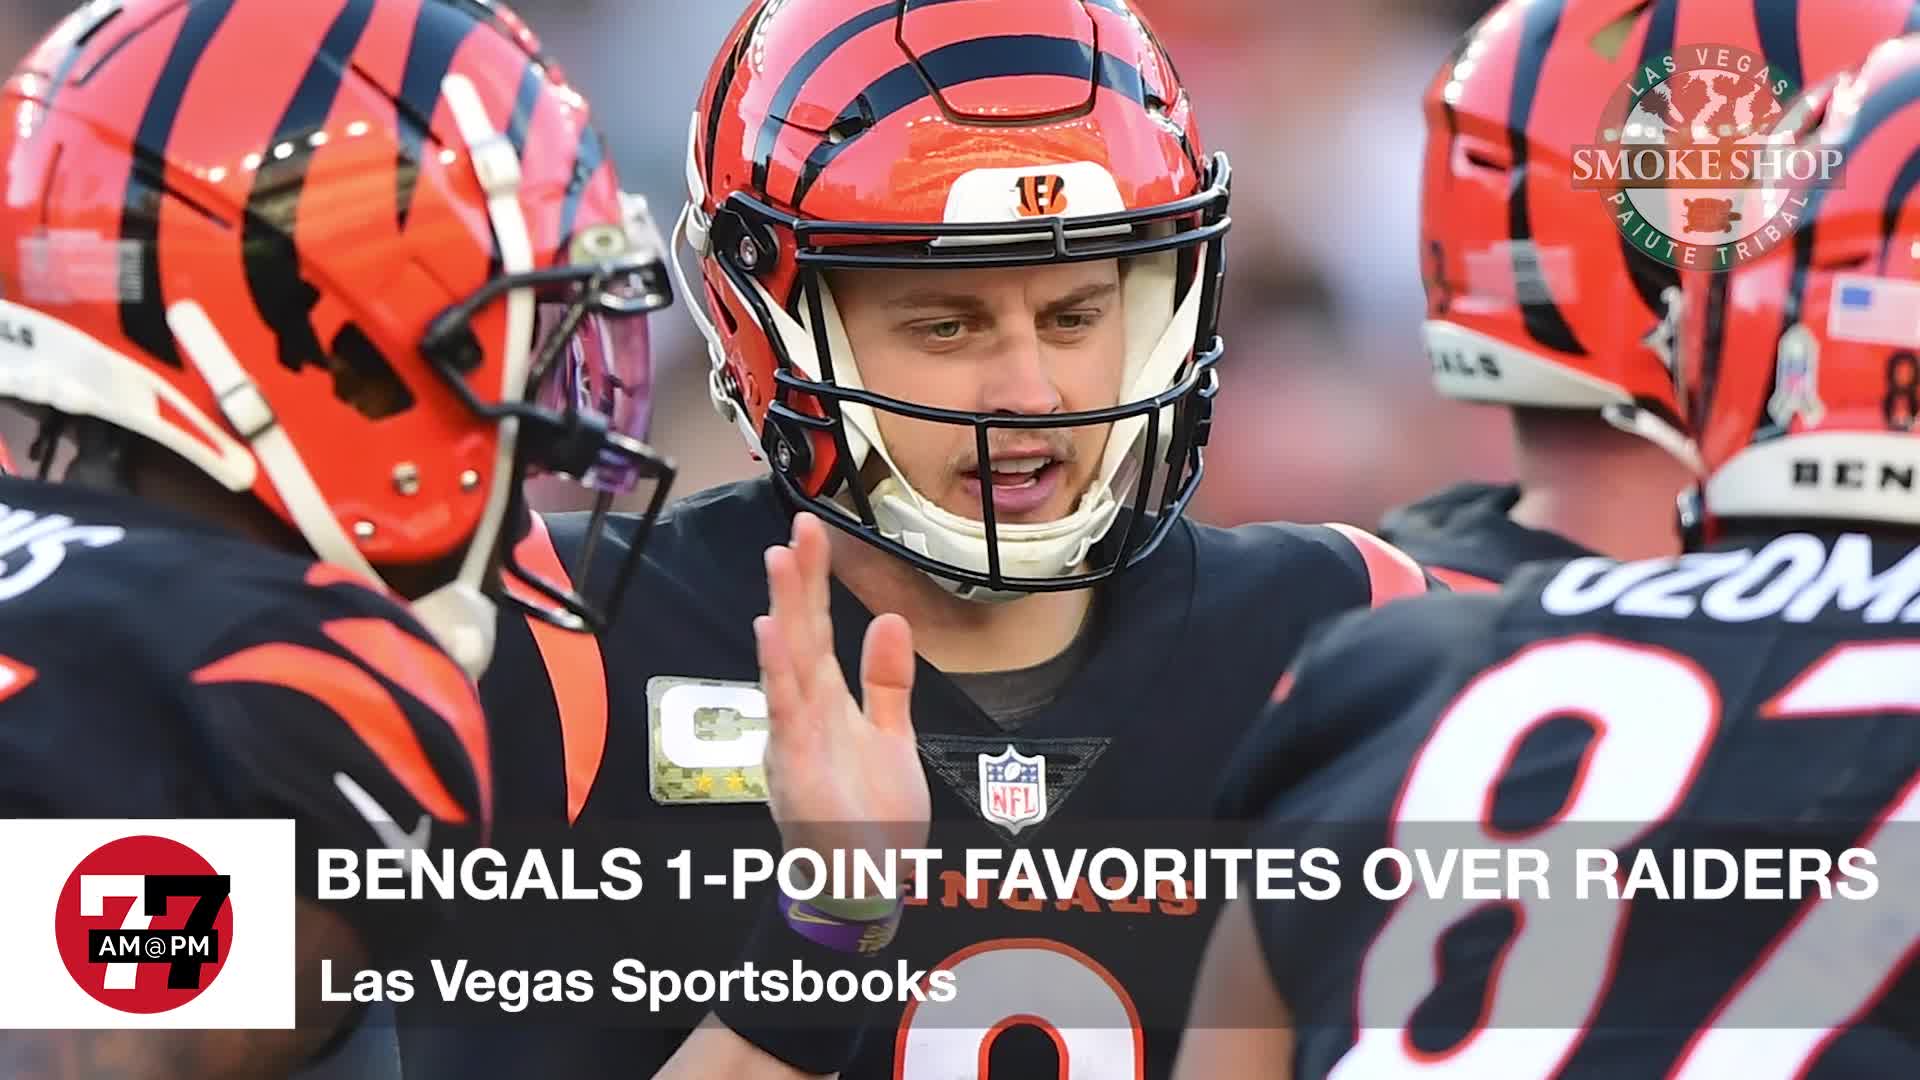 7@7PM Bengals 1-point Favorites Over Raiders